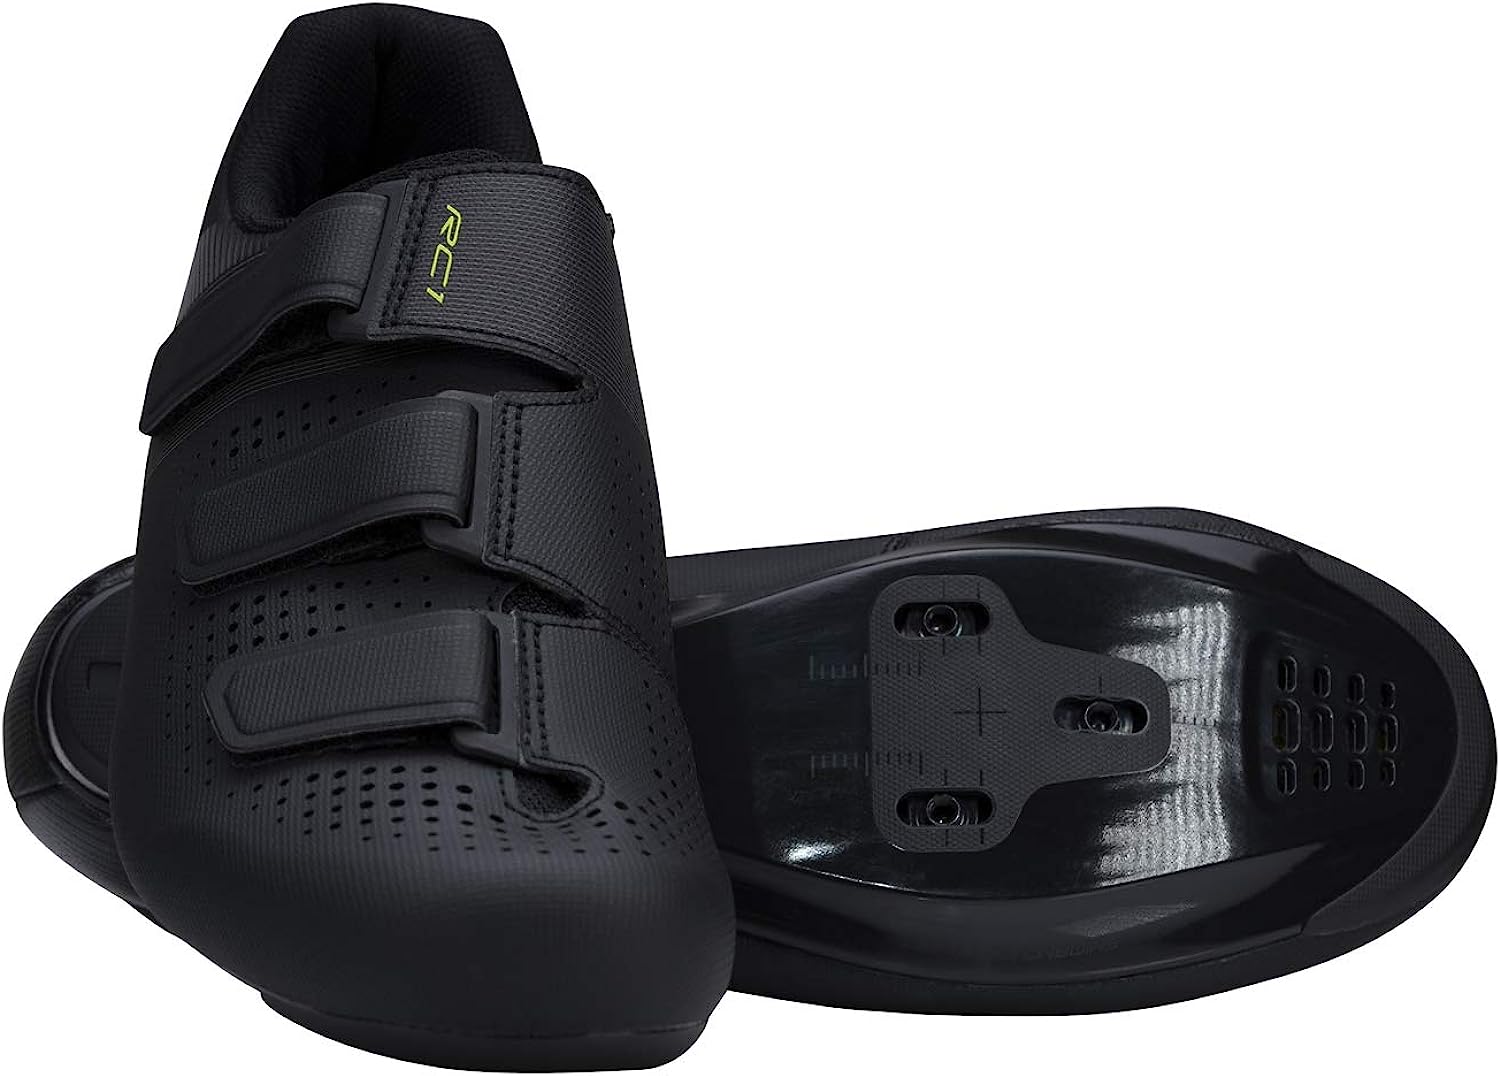 SHIMANO SH-RC100 Feature-Packed Entry Level Road Shoe